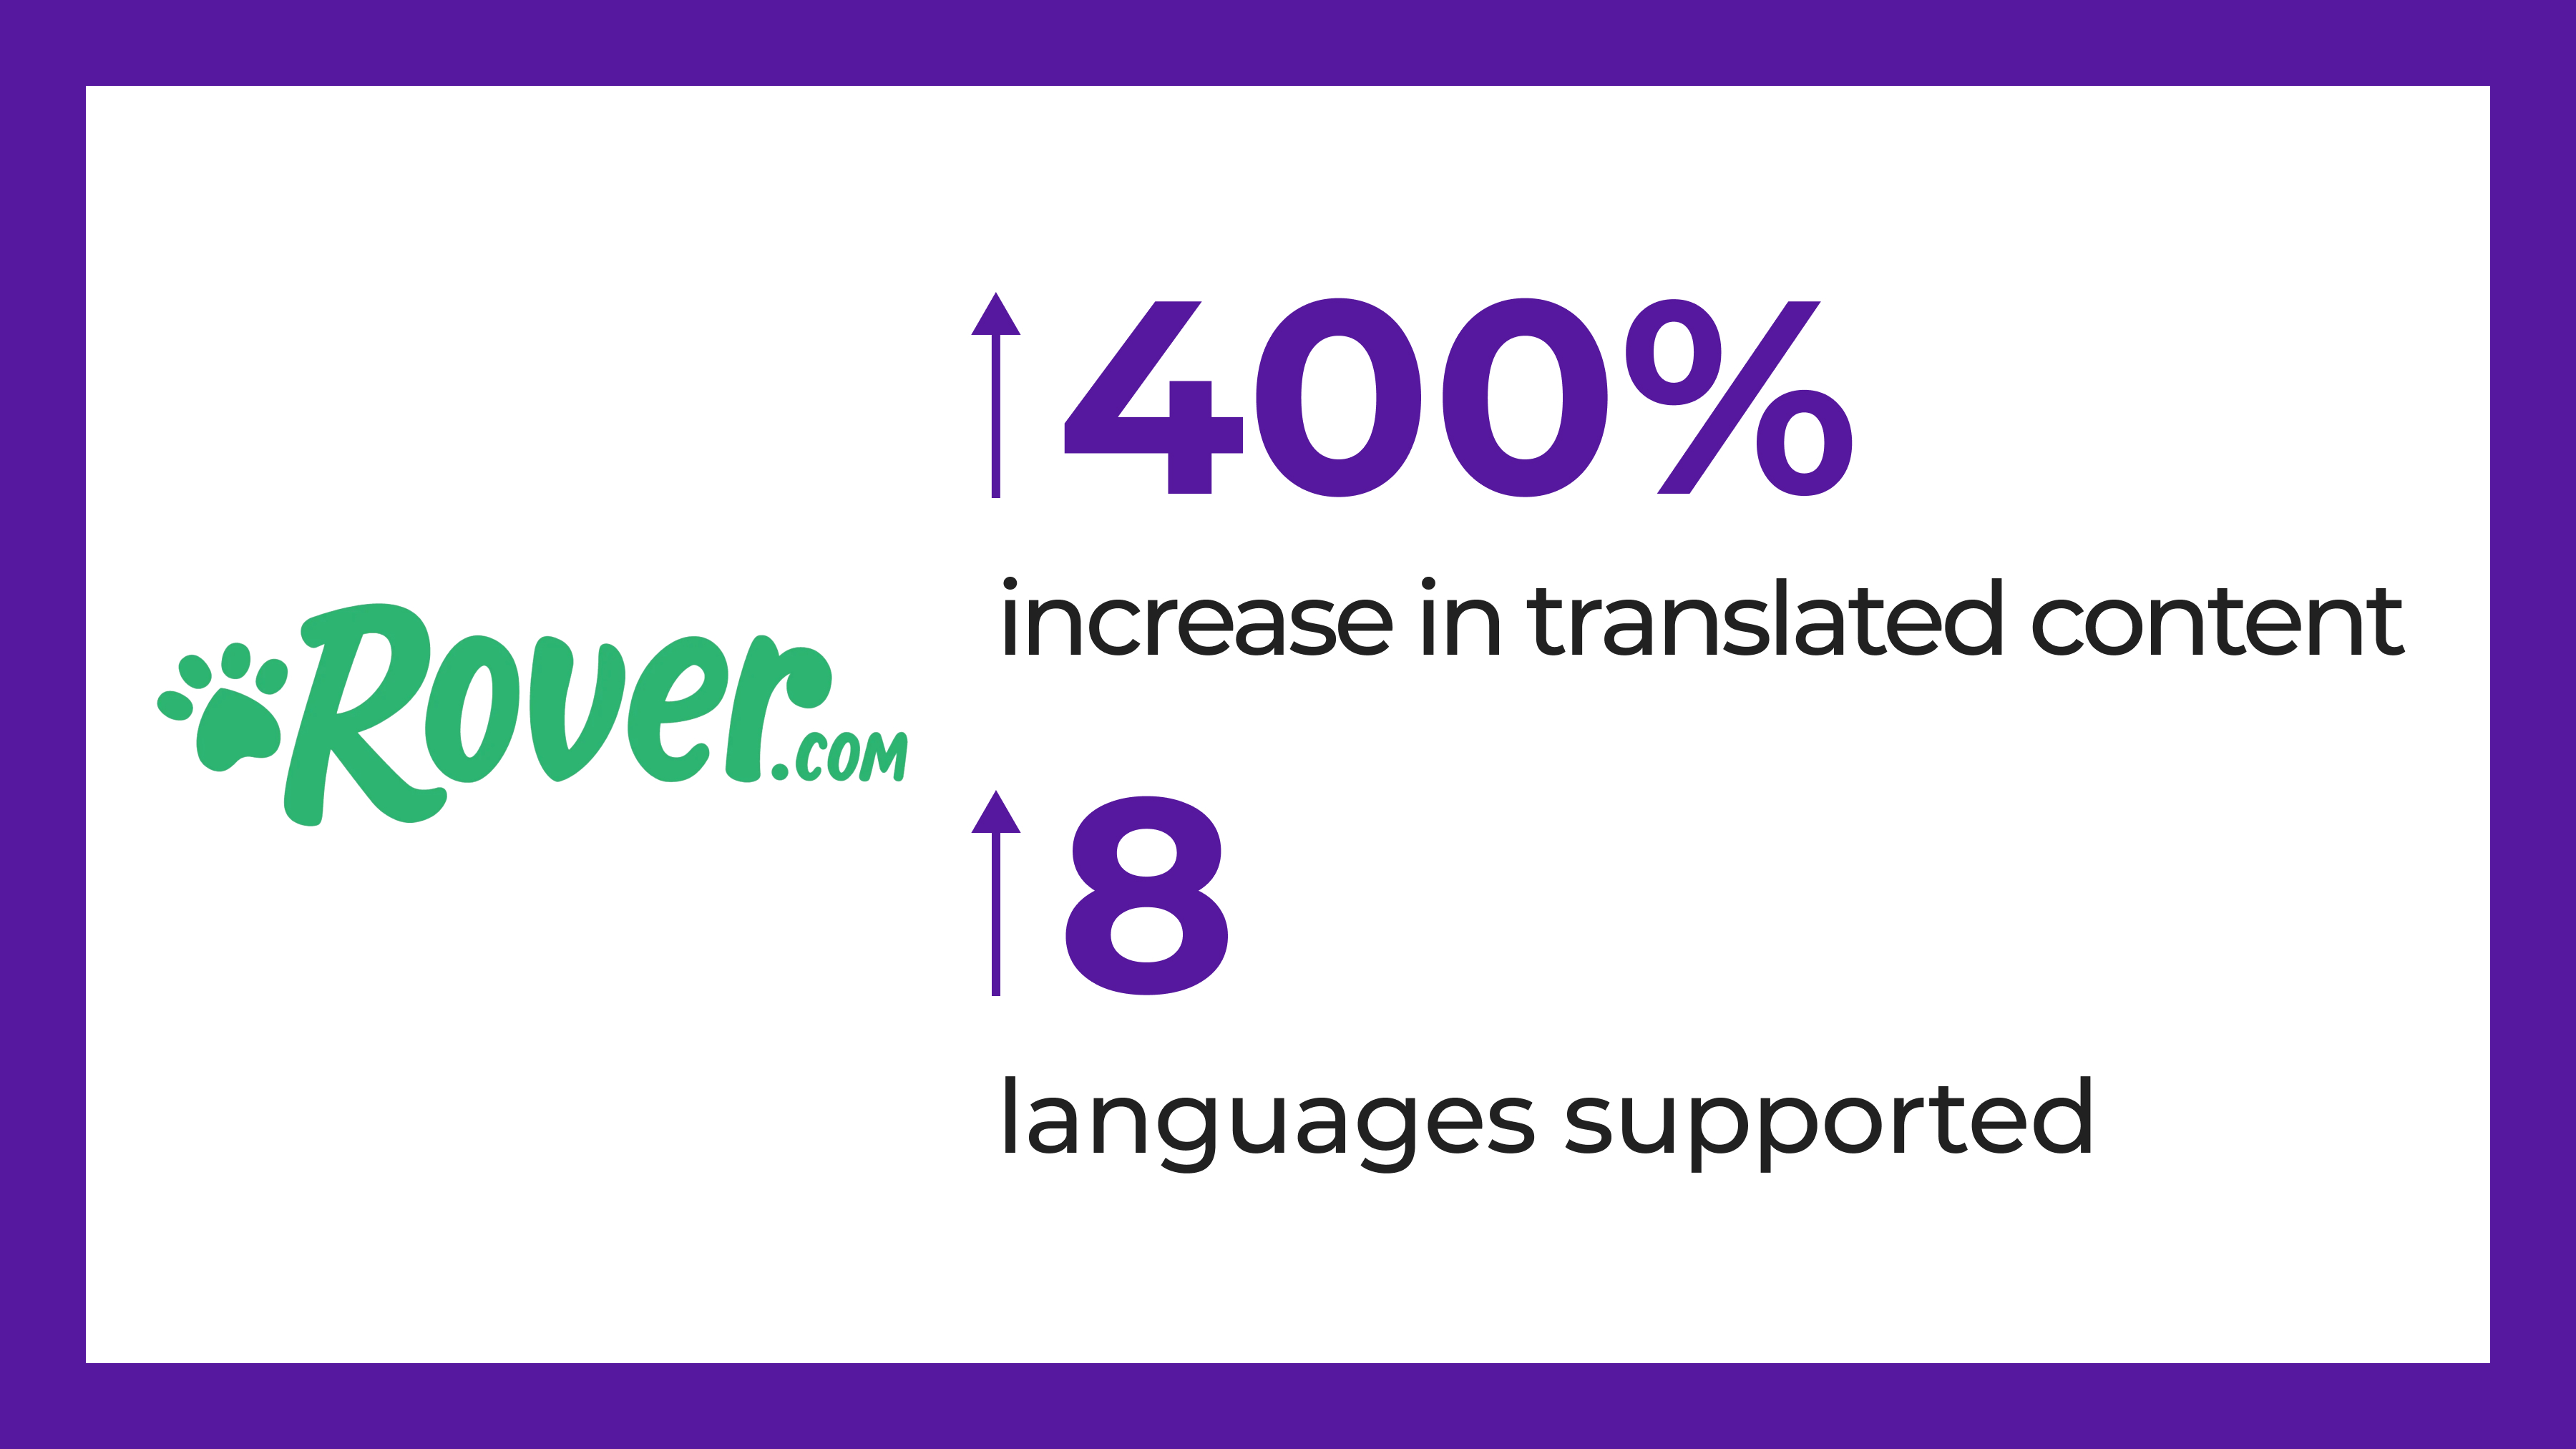 How Rover increased their translated content 400%